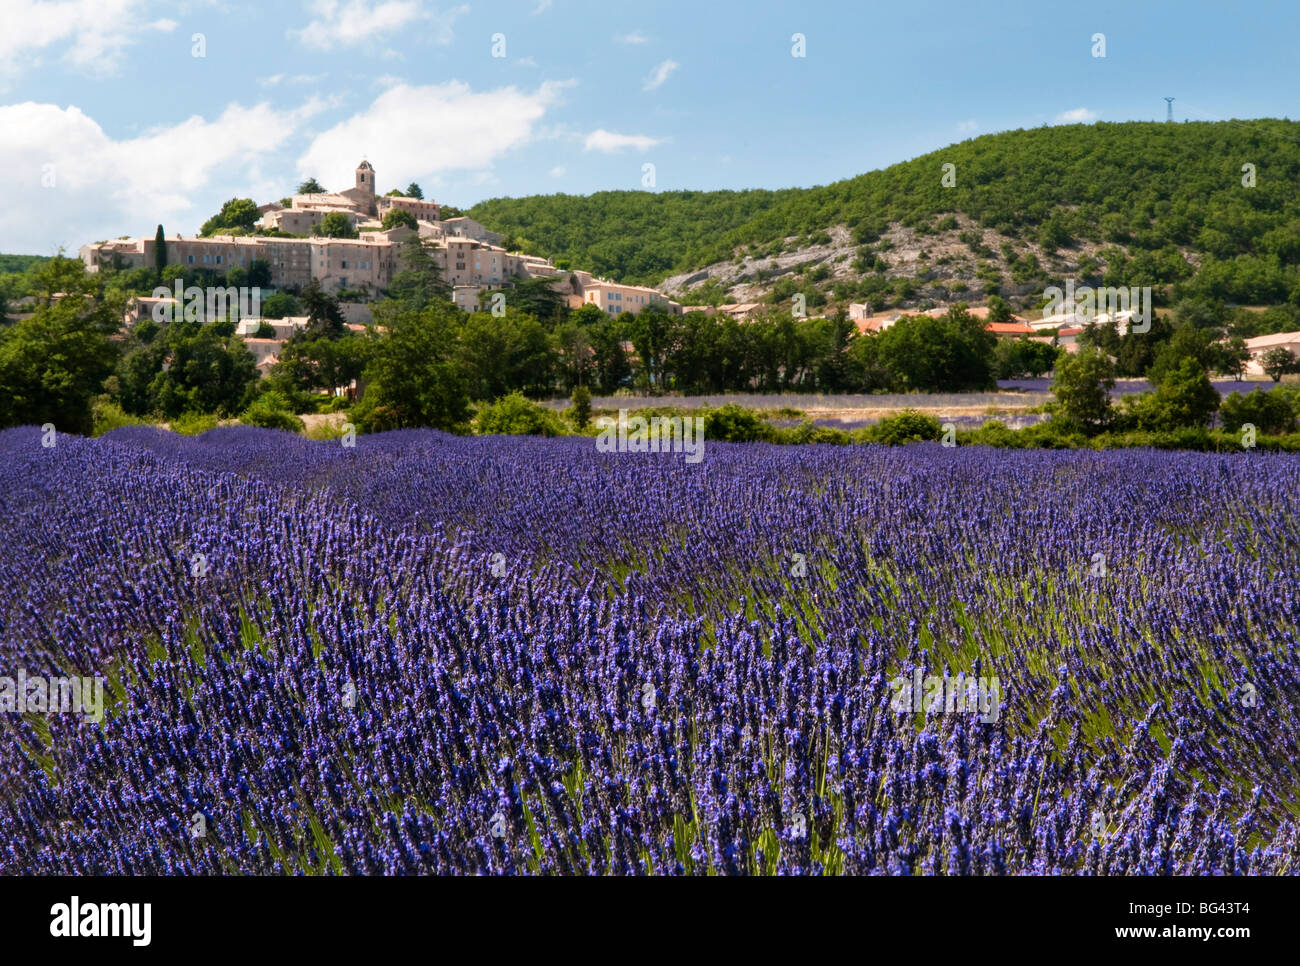 Lavender fields at Banon, Provence, France Stock Photo